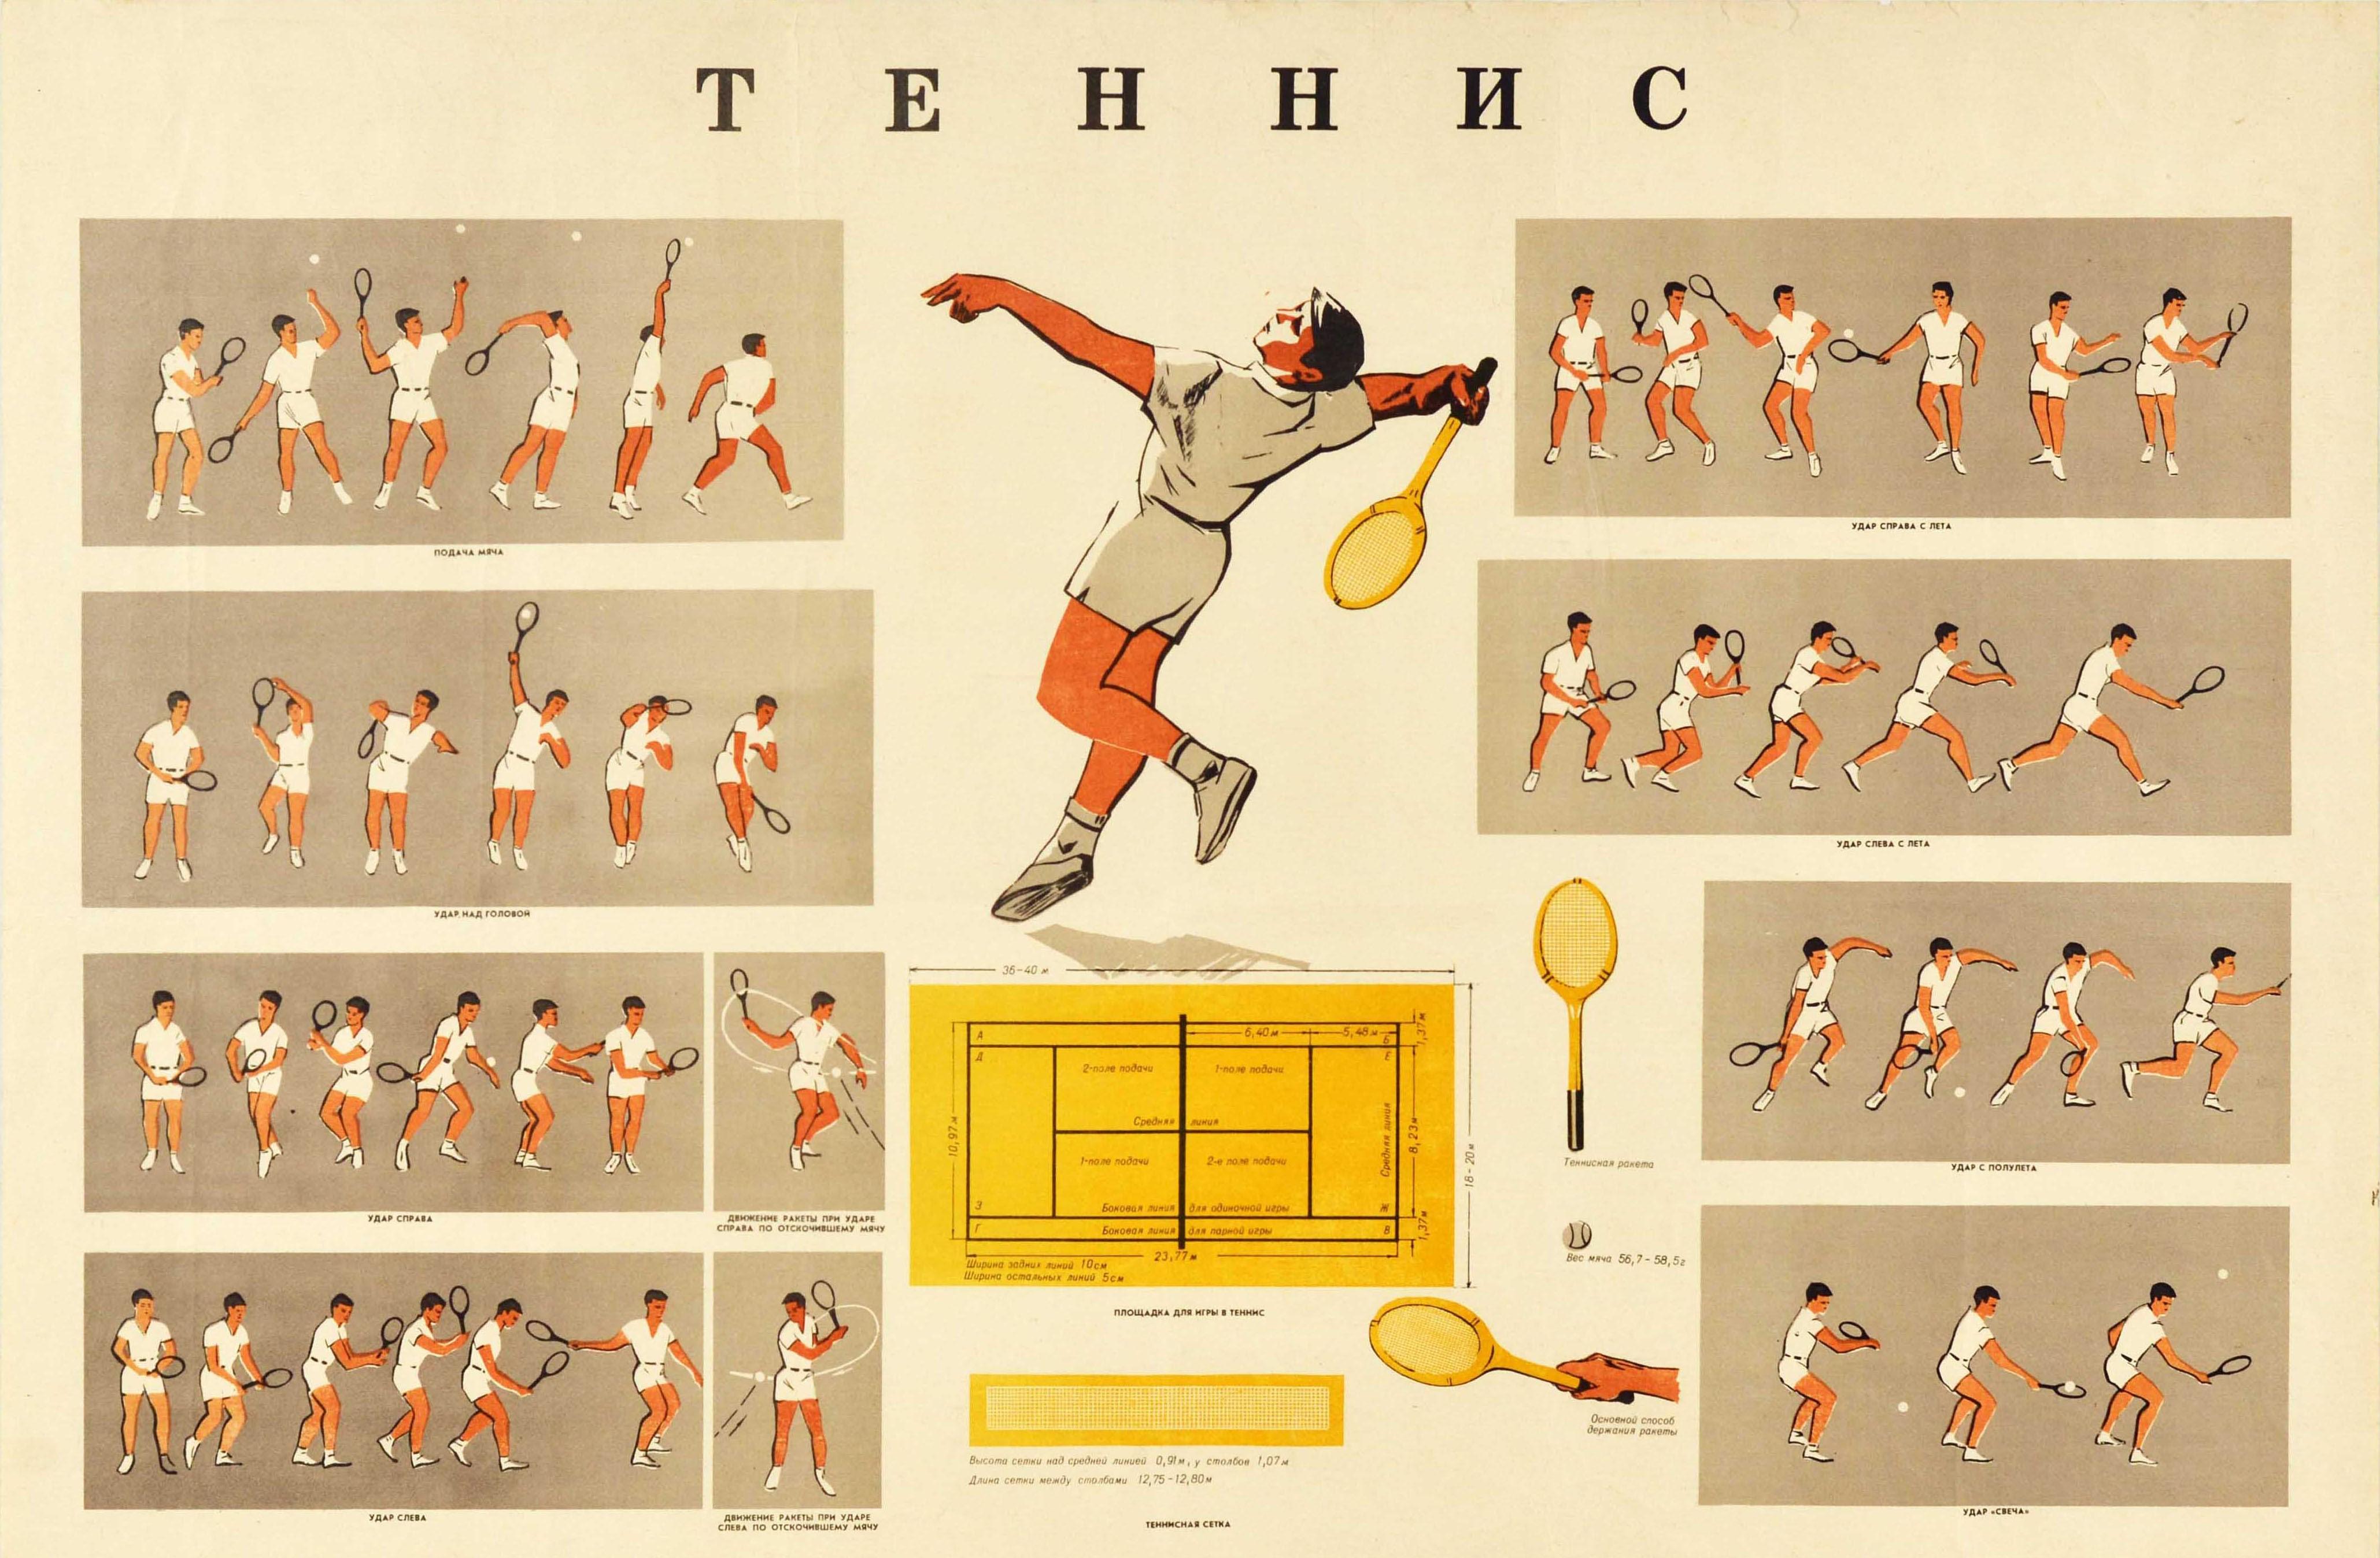 Original vintage Soviet instructional sport poster showing the positions, moves and game play of Tennis / ?????? in images depicting a player in each box performing various actions such as serving the ball and hitting a backhand shot, a player